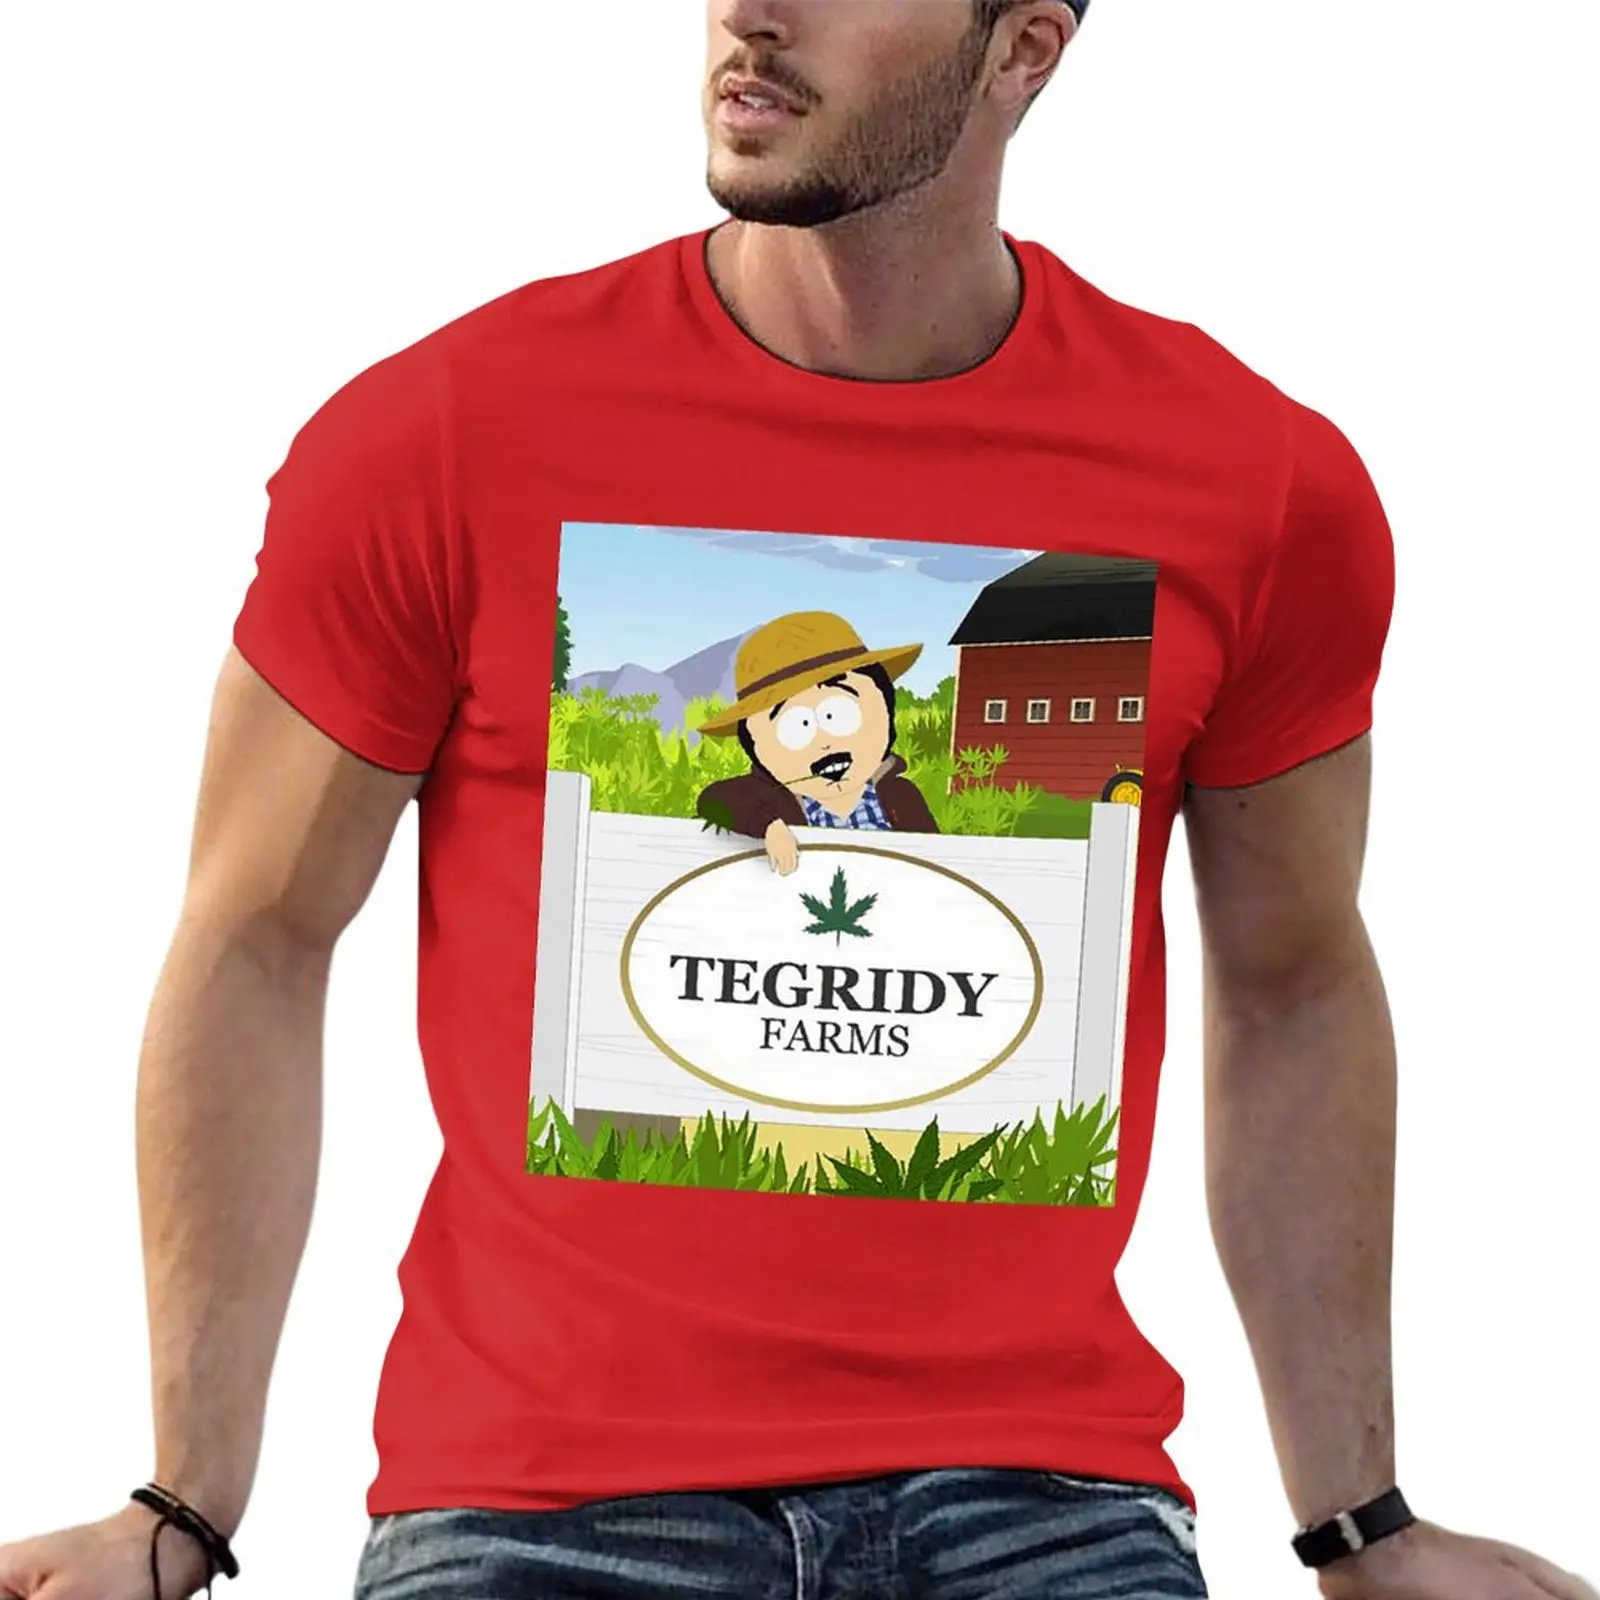 

New A Tegridy Life Classic T-Shirt Short sleeve vintage clothes mens champion t shirts